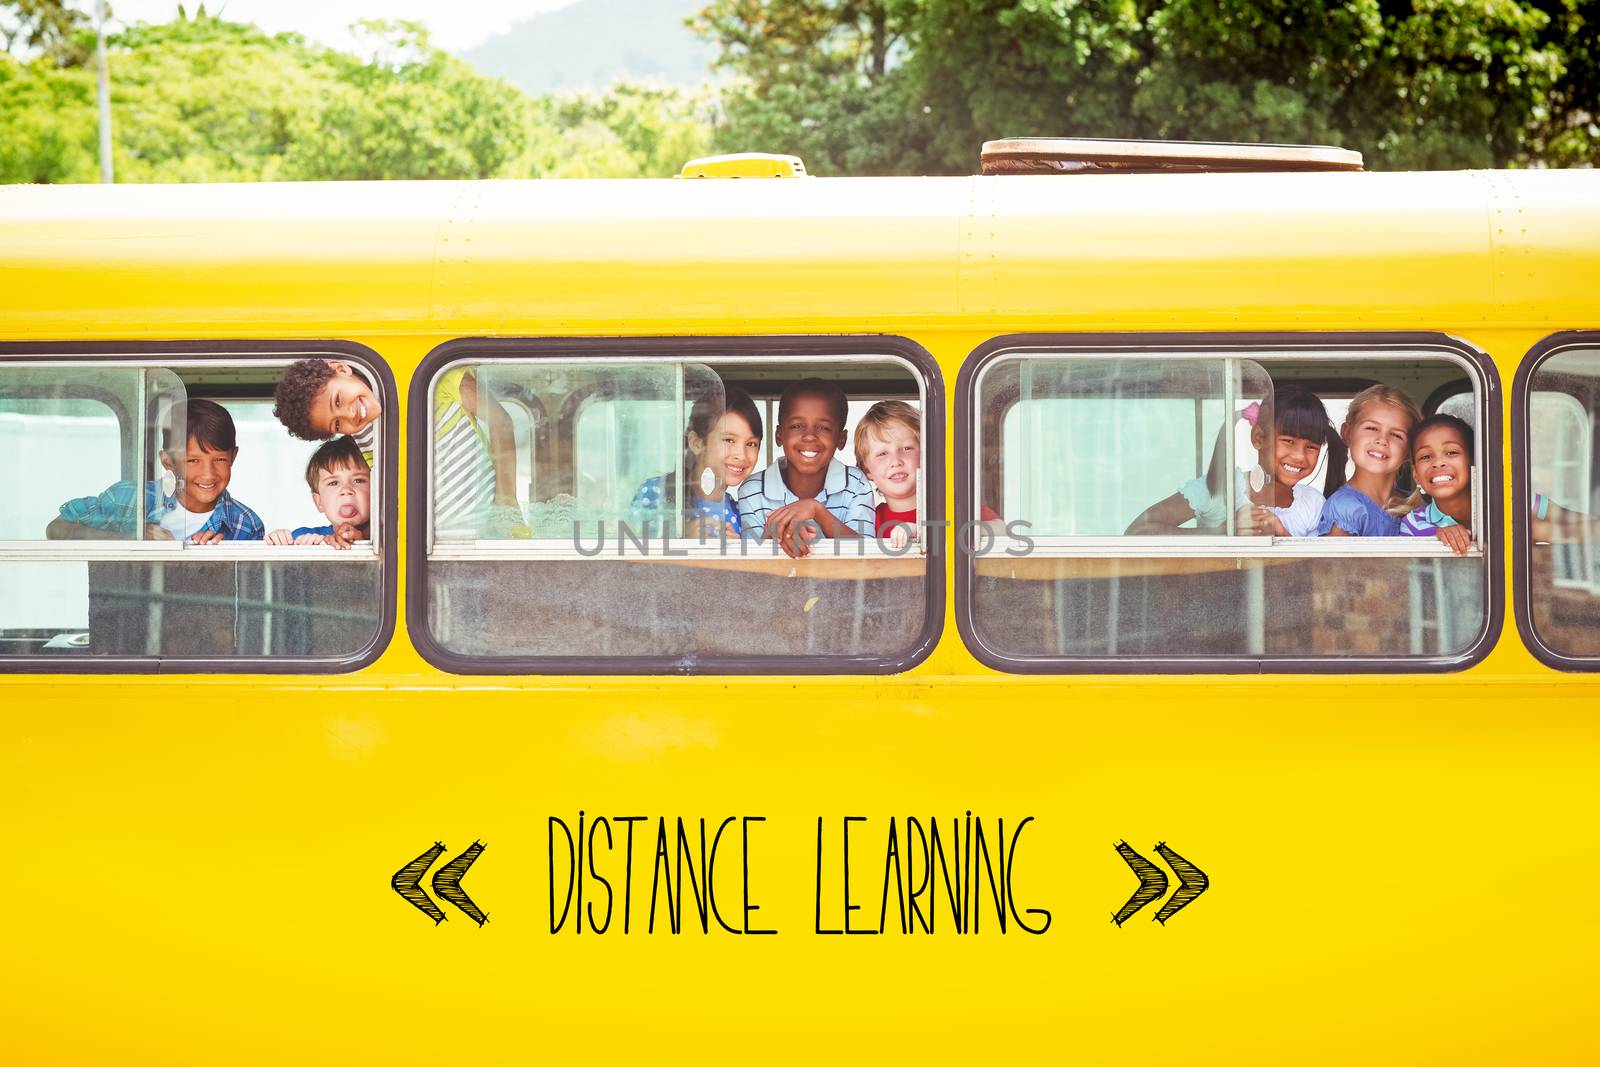 Distance learning against cute pupils smiling at camera in the school bus by Wavebreakmedia